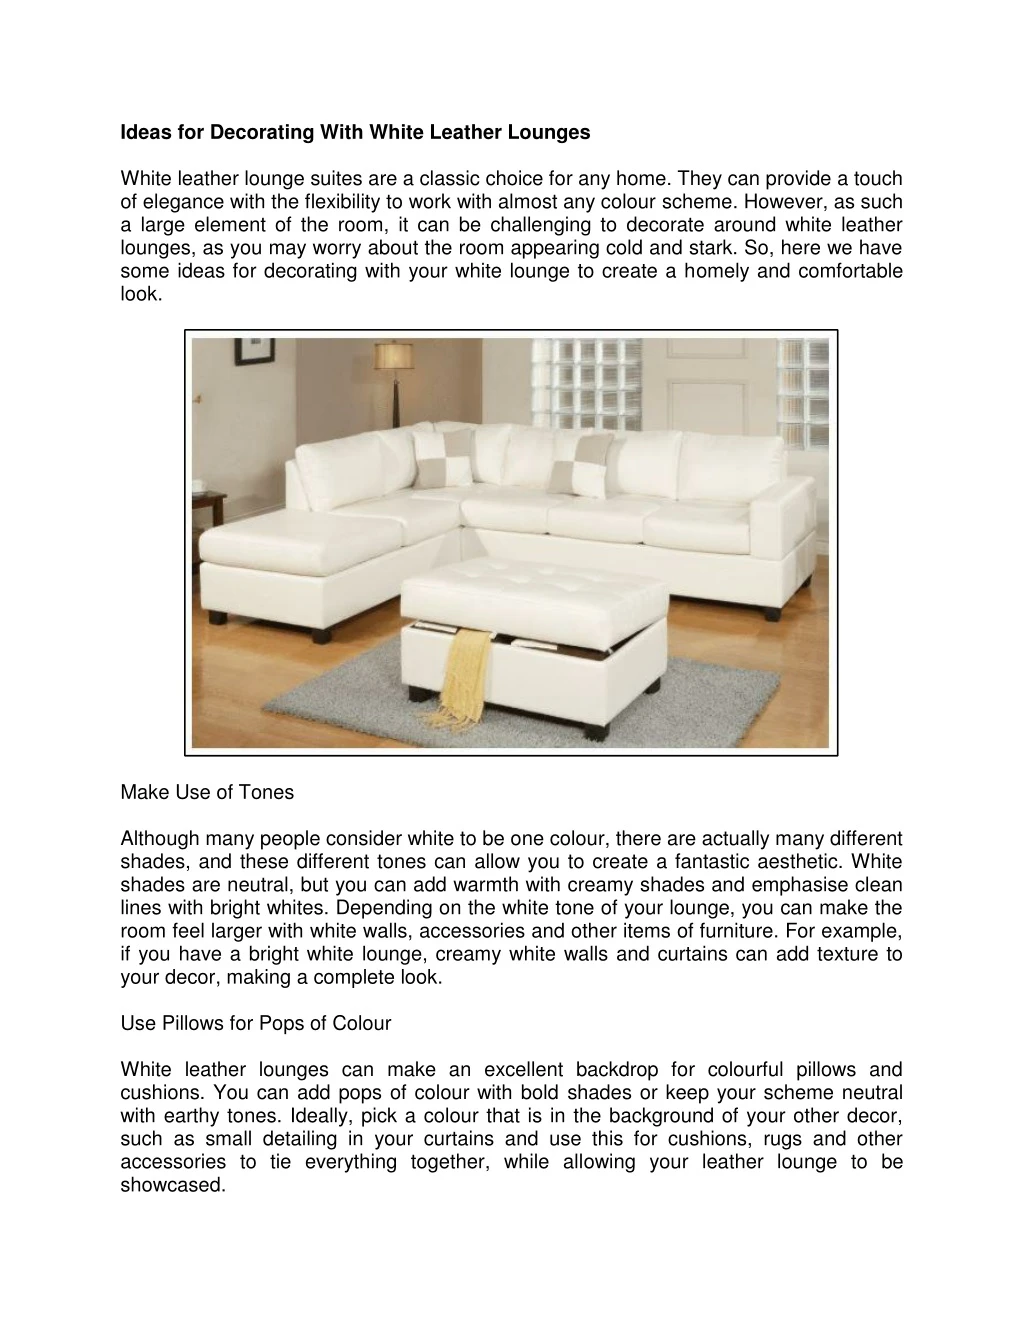 ideas for decorating with white leather lounges n.